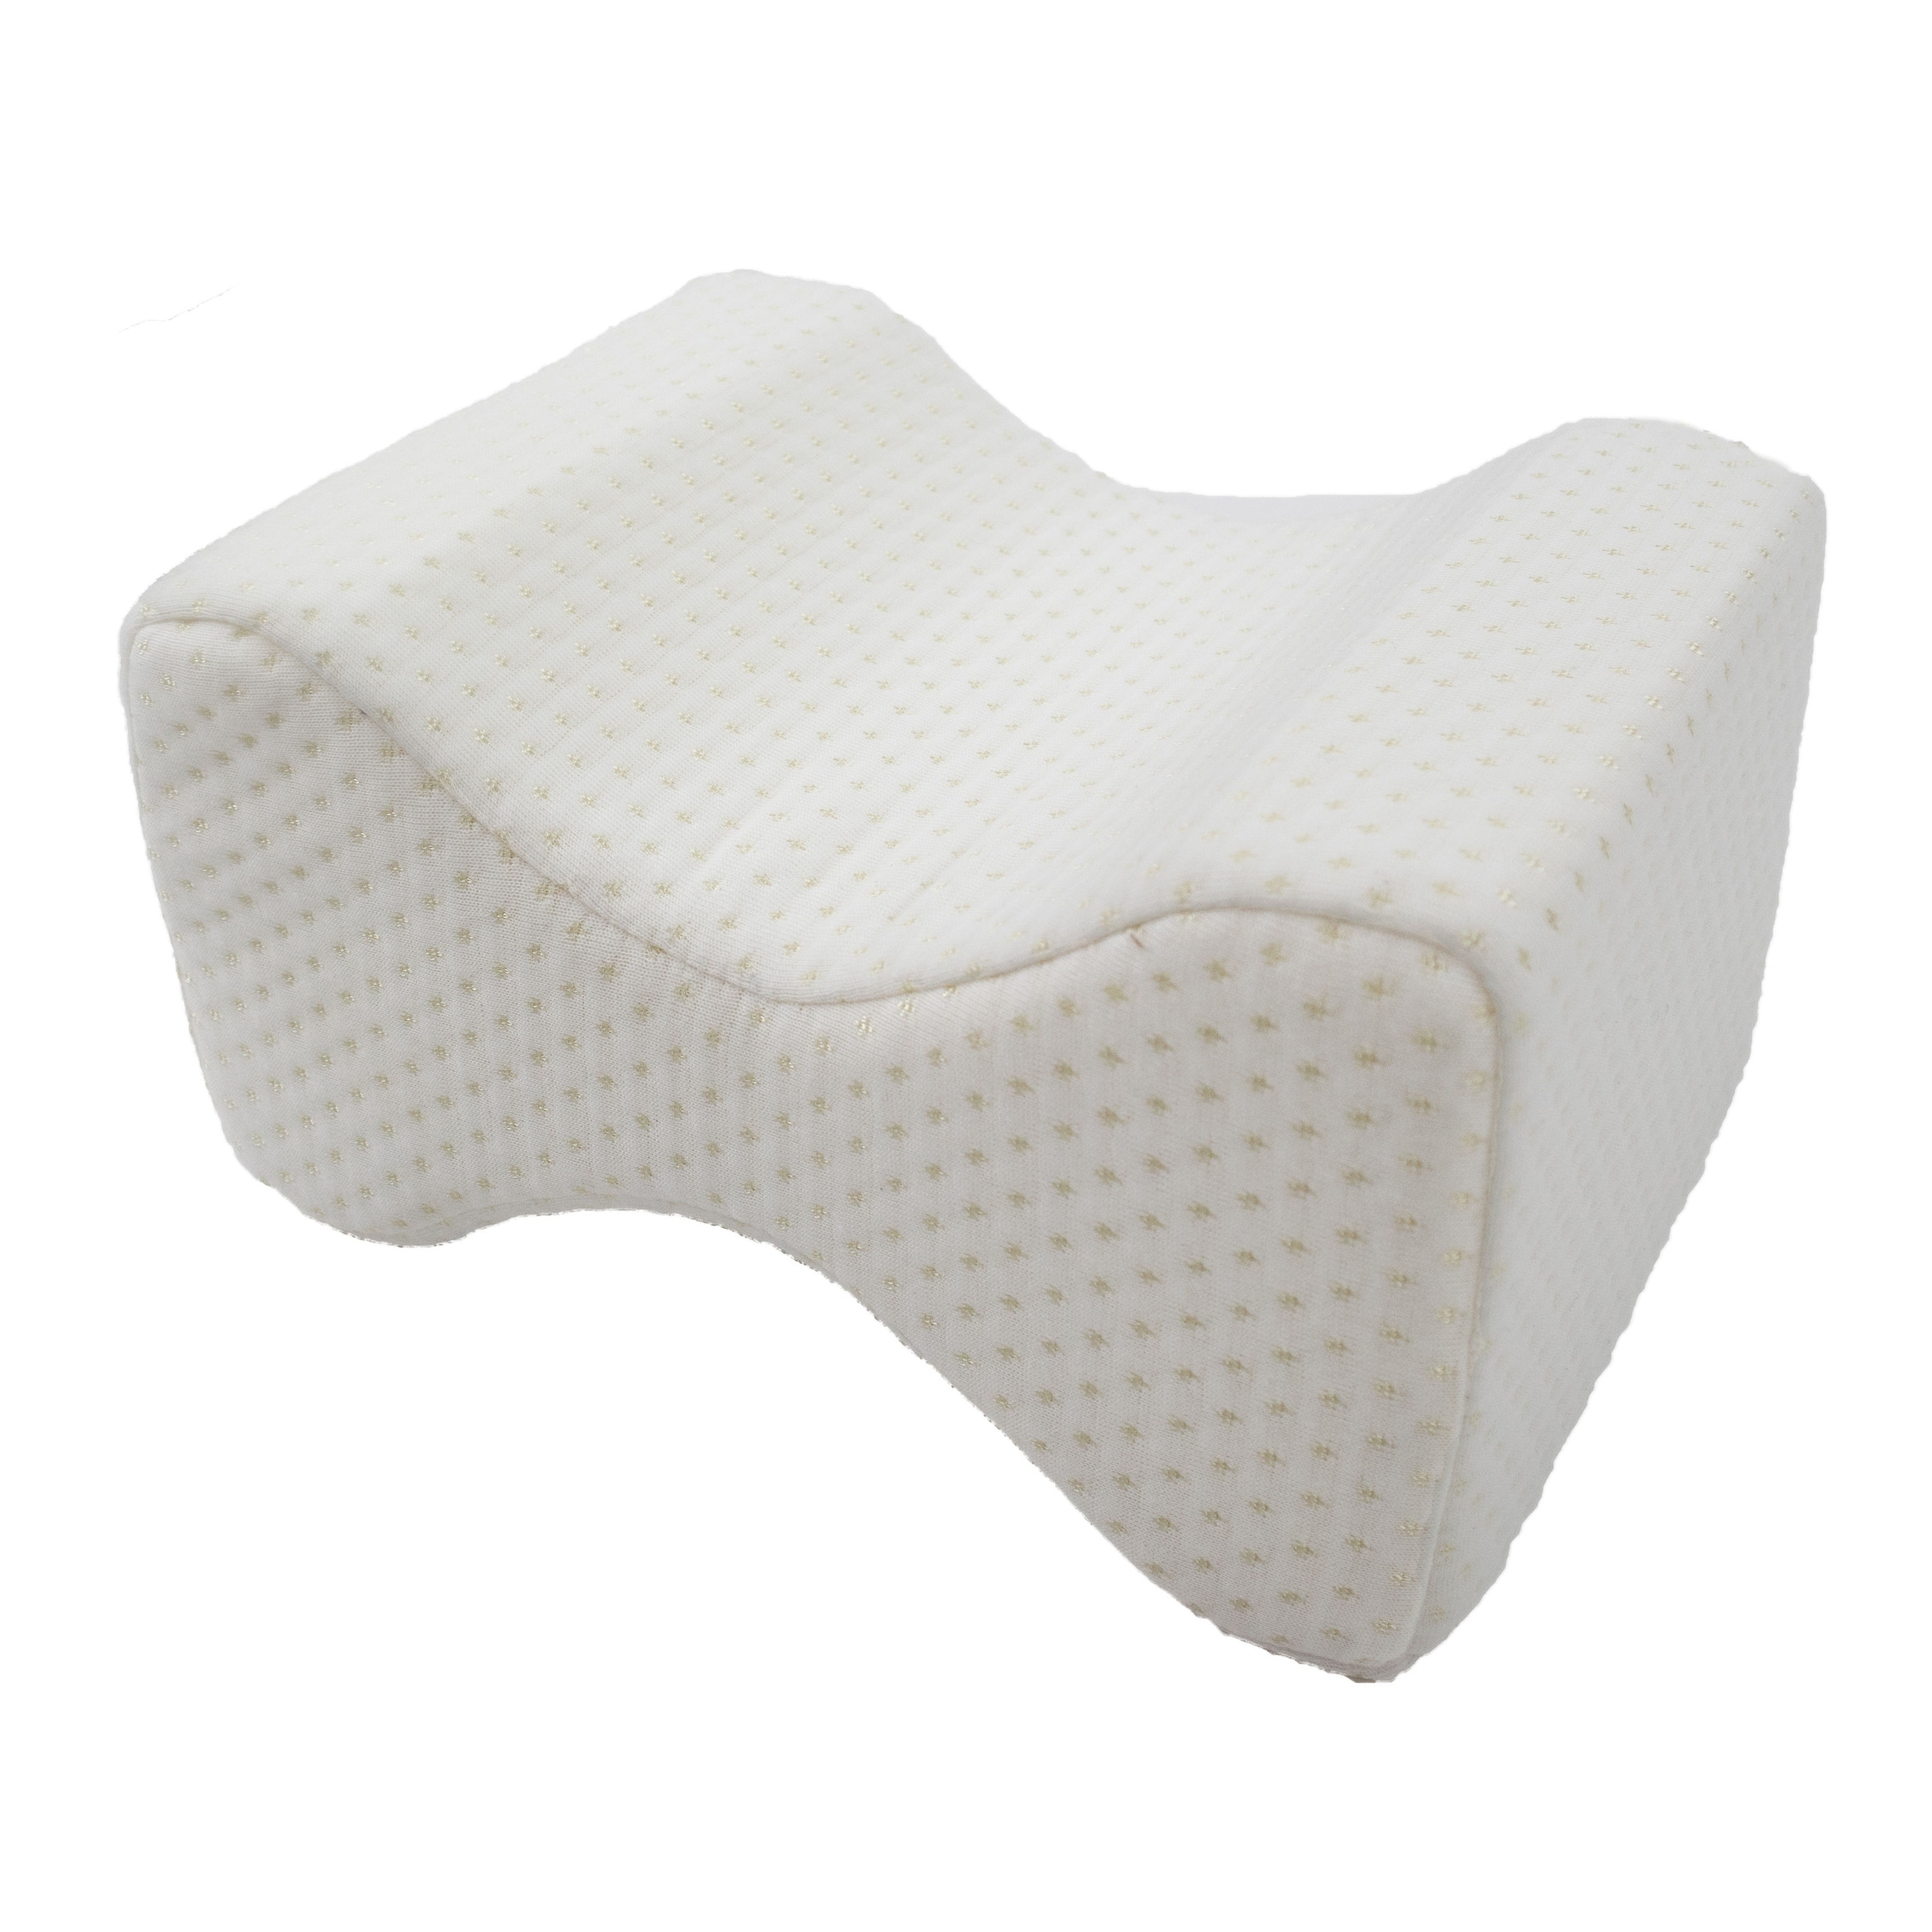 Flat Top Bed Wedge Pillow, Orthopedic Knee Pillow for Side